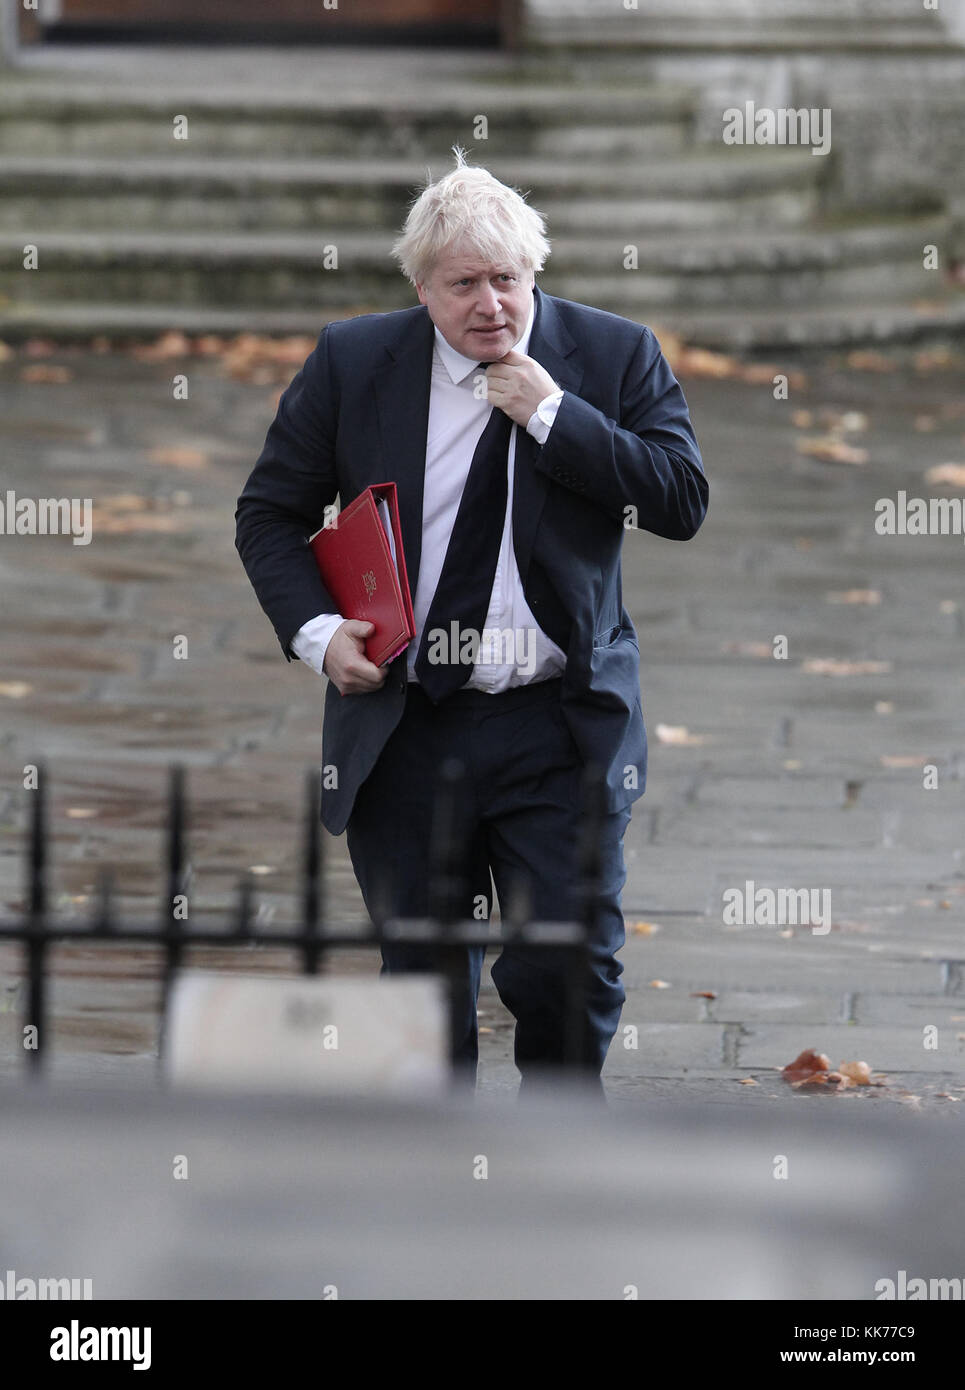 London, UK. 28th November, 2017. Boris Johnson, Secretary of State for Foreign and Commonwealth Affairs attends the weekly cabinet meeting in Downing  Stock Photo